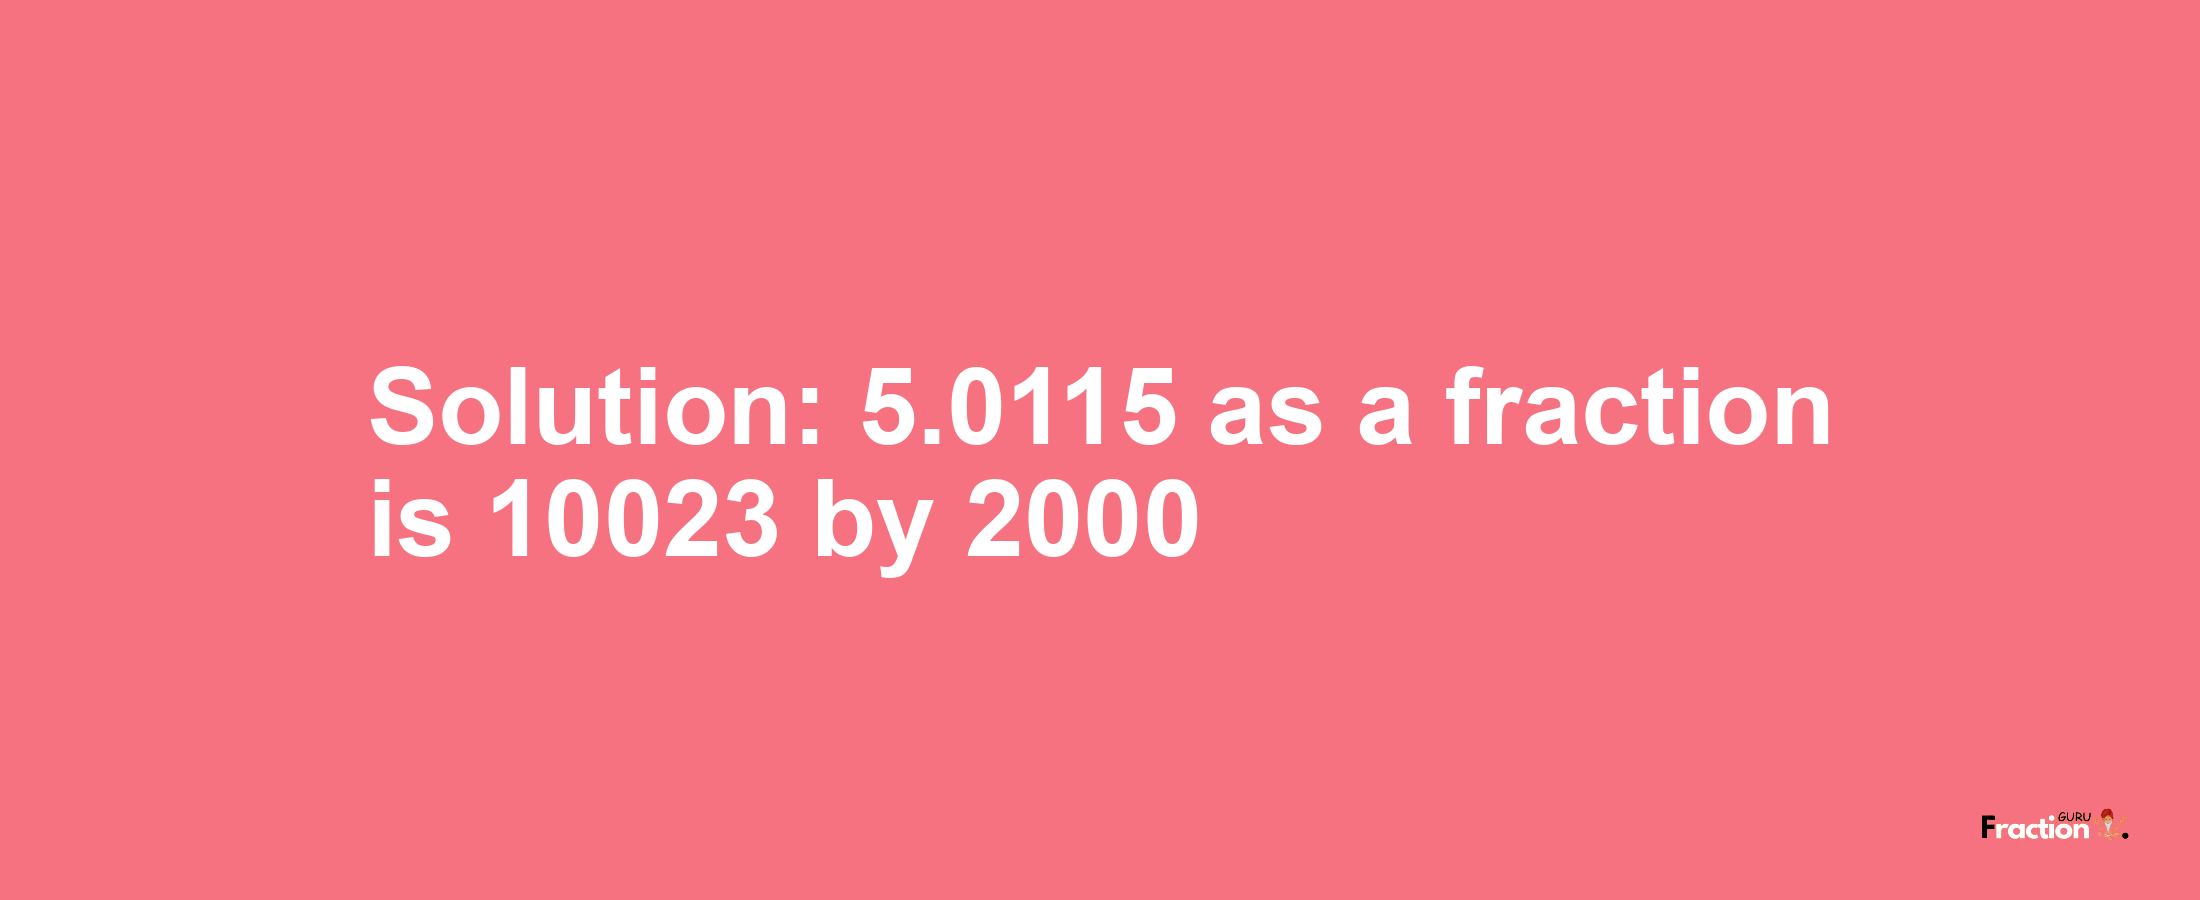 Solution:5.0115 as a fraction is 10023/2000